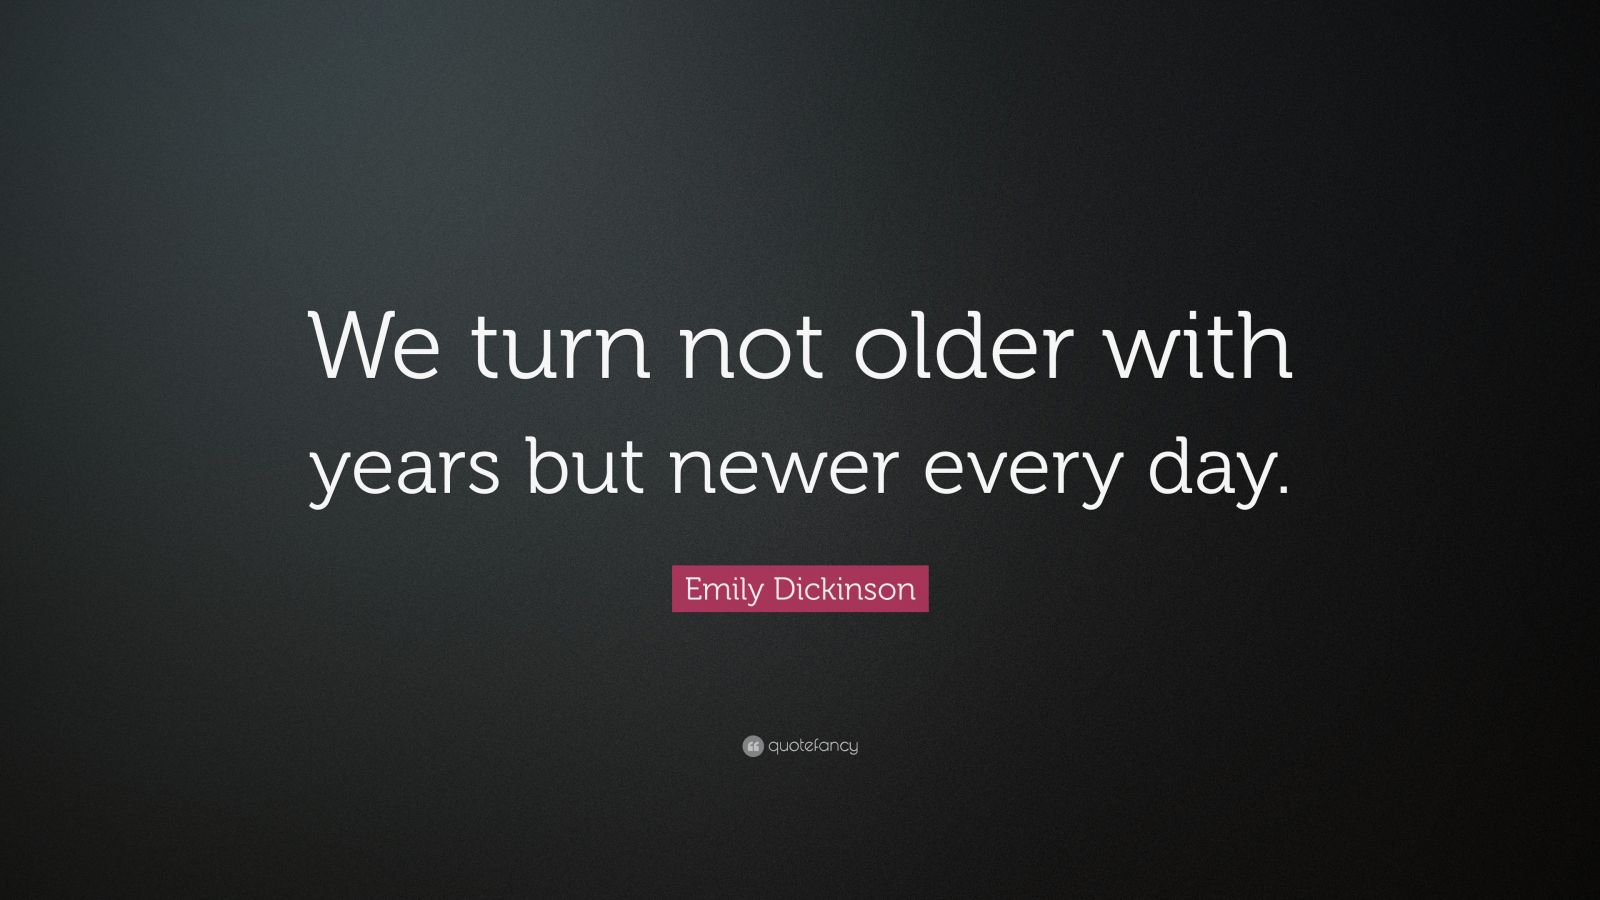 Emily Dickinson Quote: “We turn not older with years but newer every ...